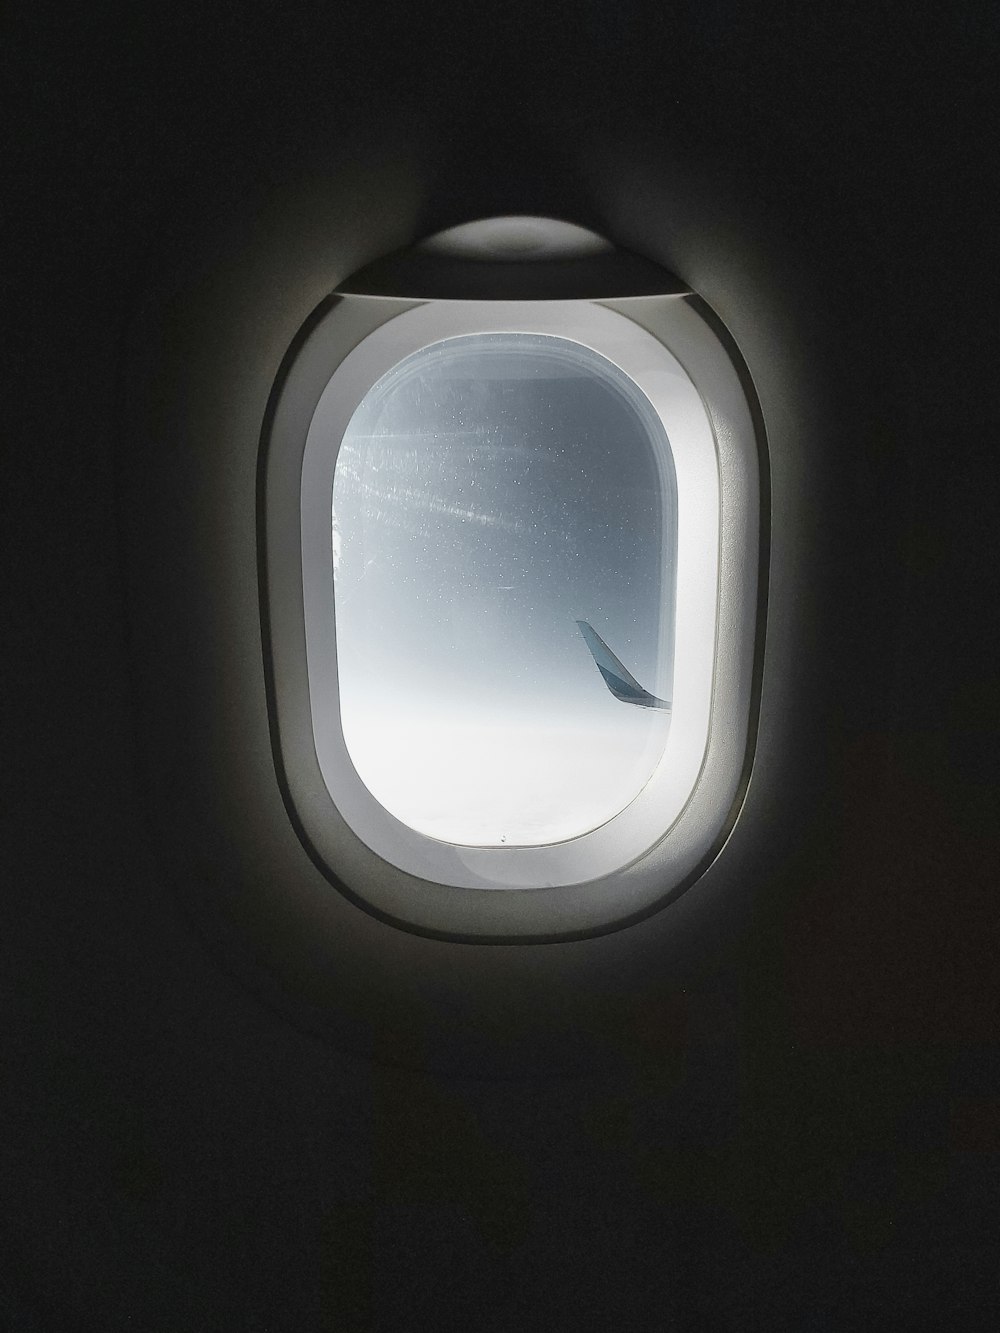 an airplane window with a view of the sky